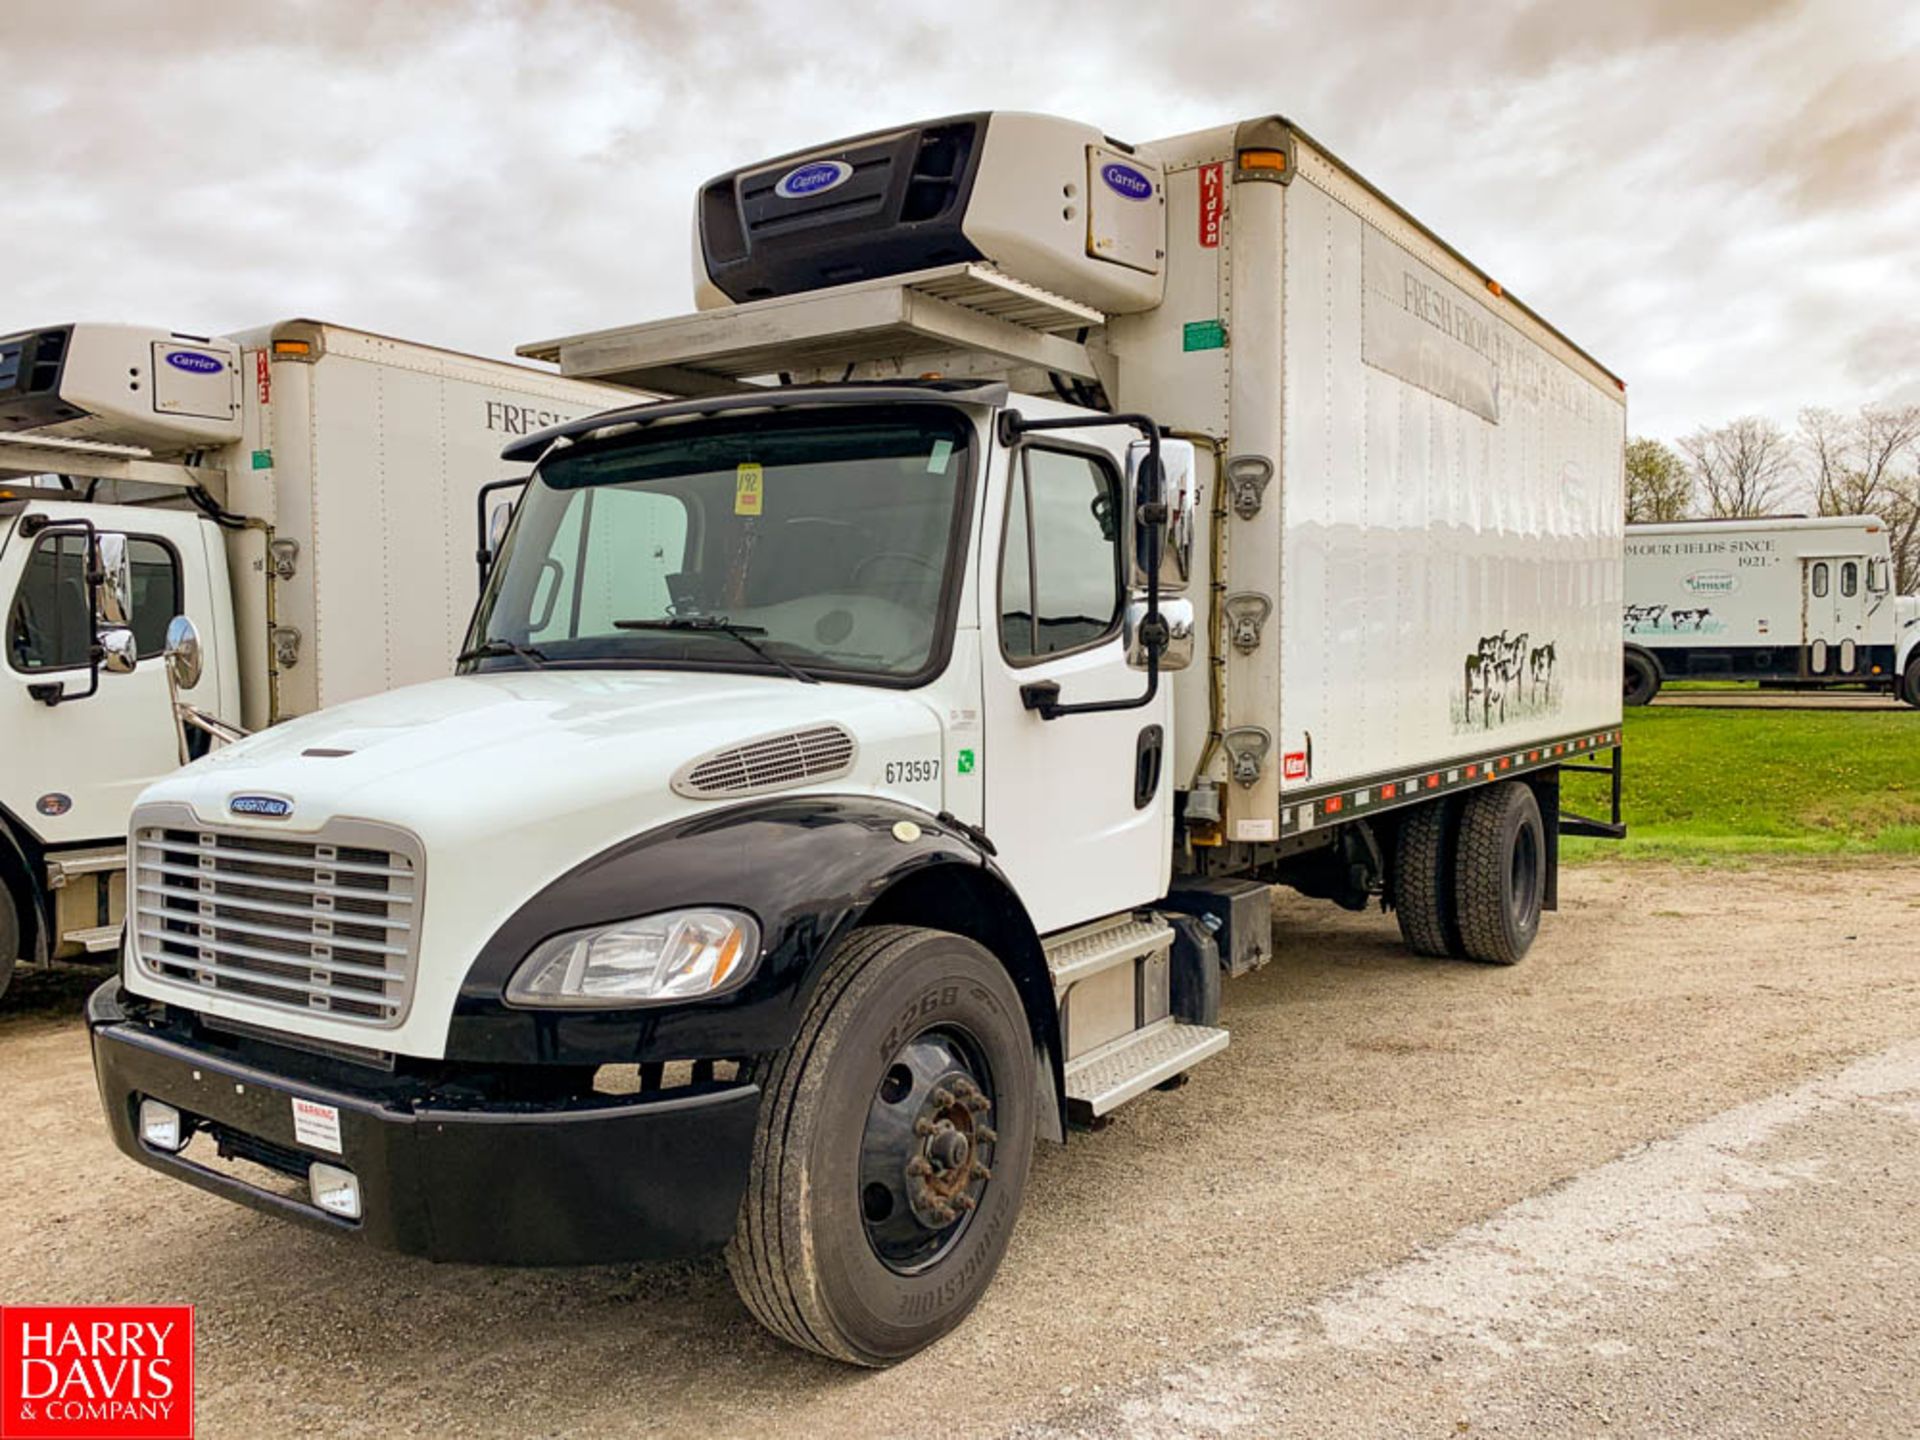 2017 Freightliner 20' Refrigerated Delivery Truck Model: M2106, 33,000 GVWR, Cummins IBS 6.7 280